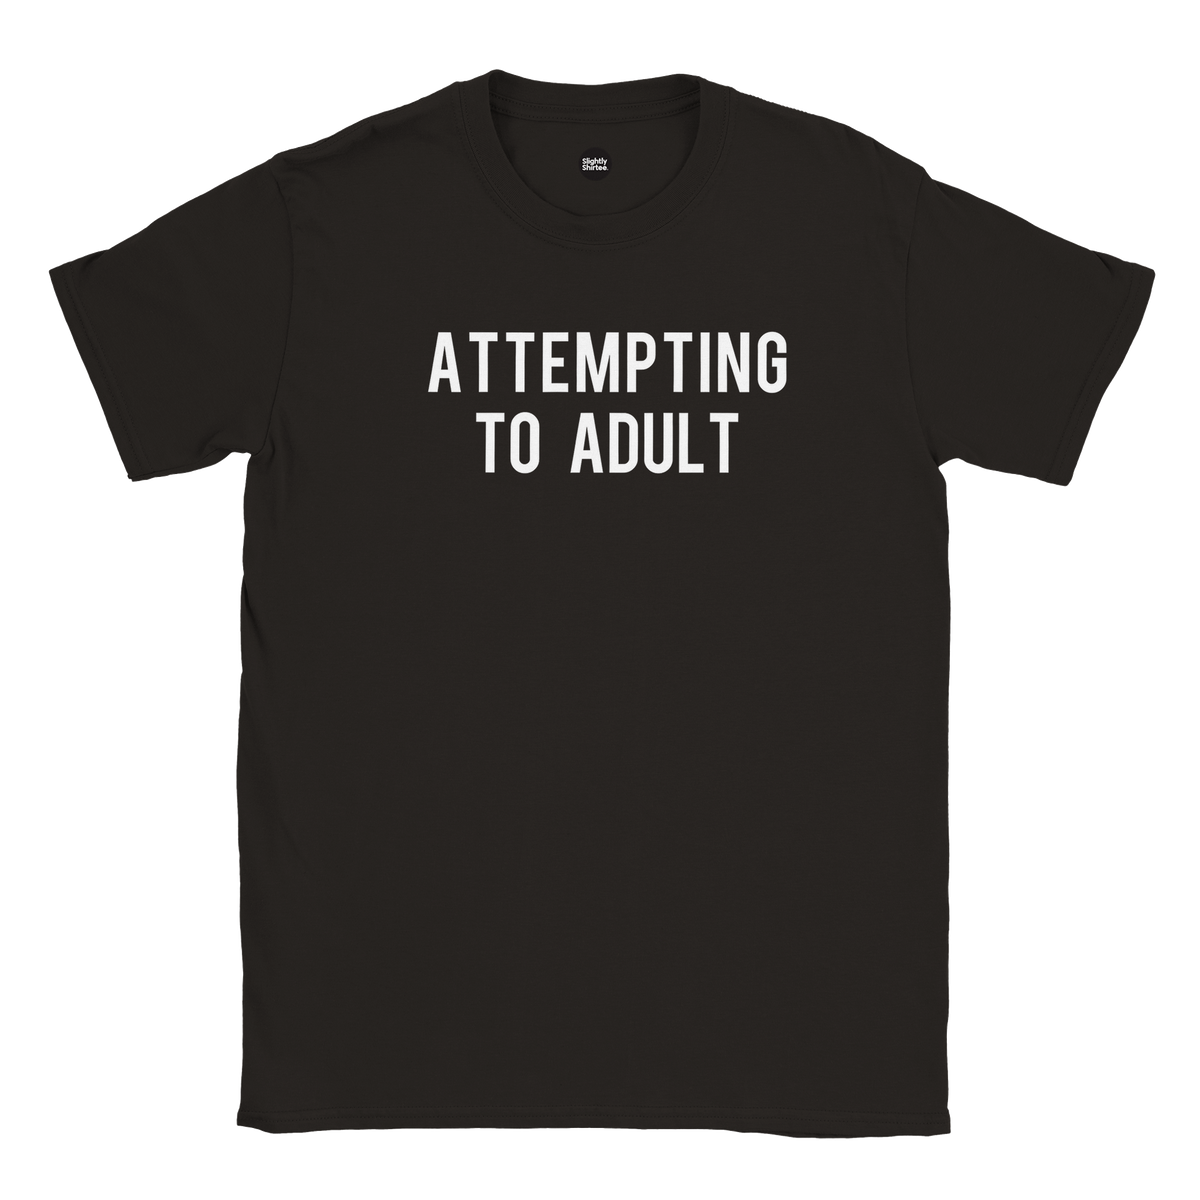 Black slogan tshirt which says Attempting to Adult on white background